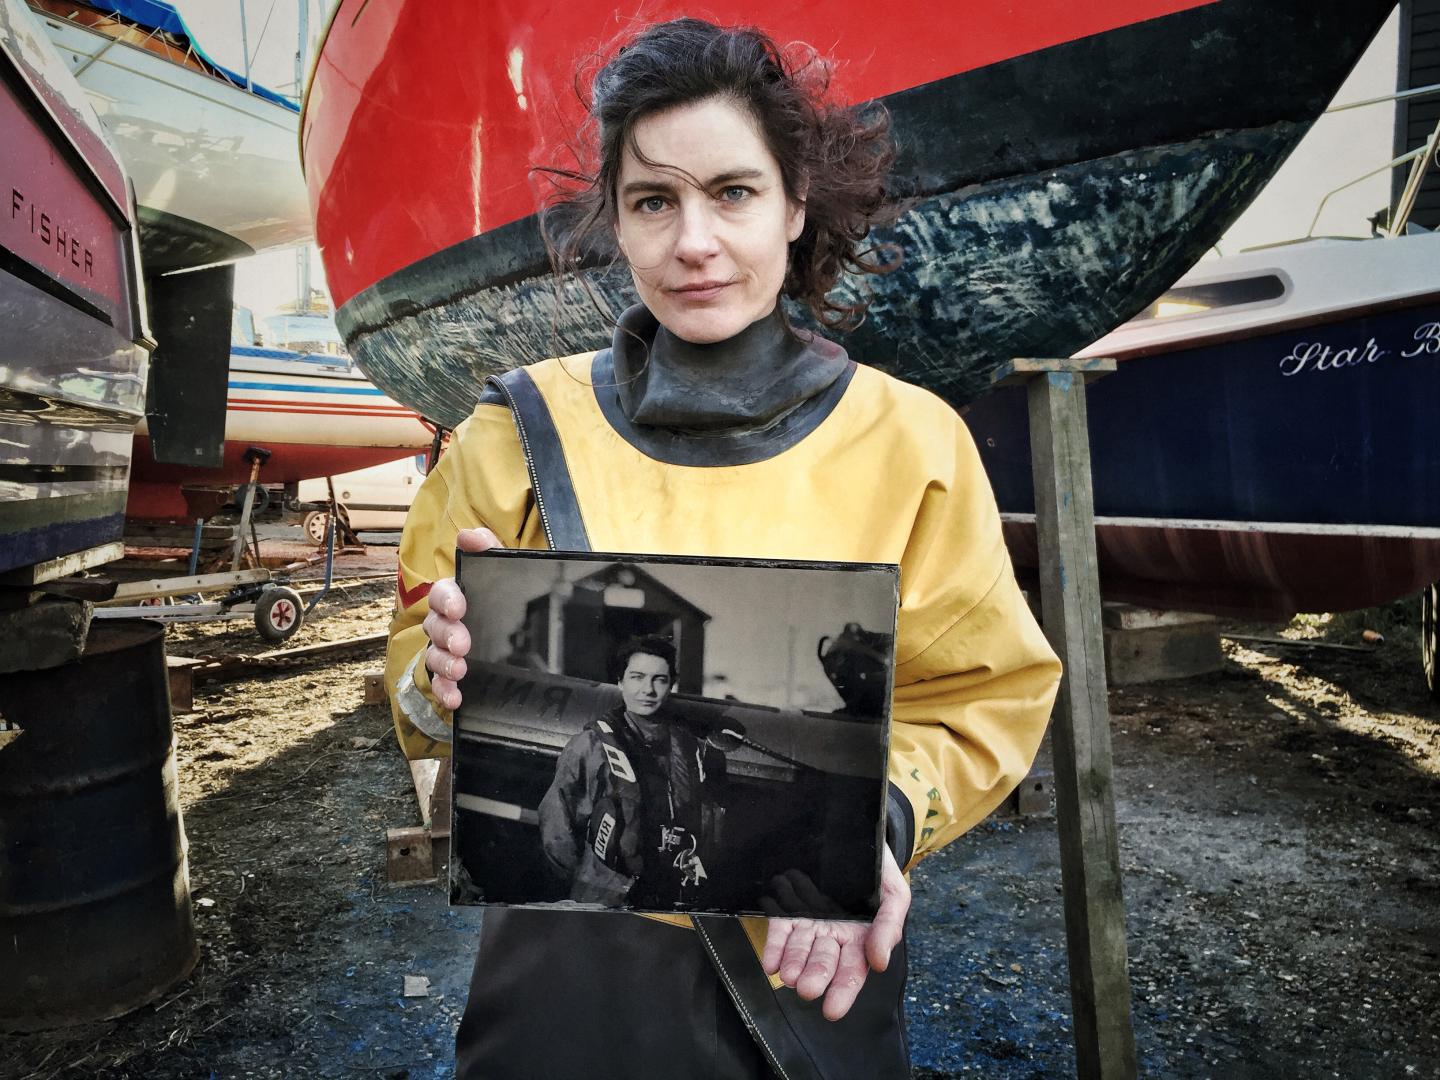 An RNLI lifeboat volunteer holds a glass plate photograph of herself